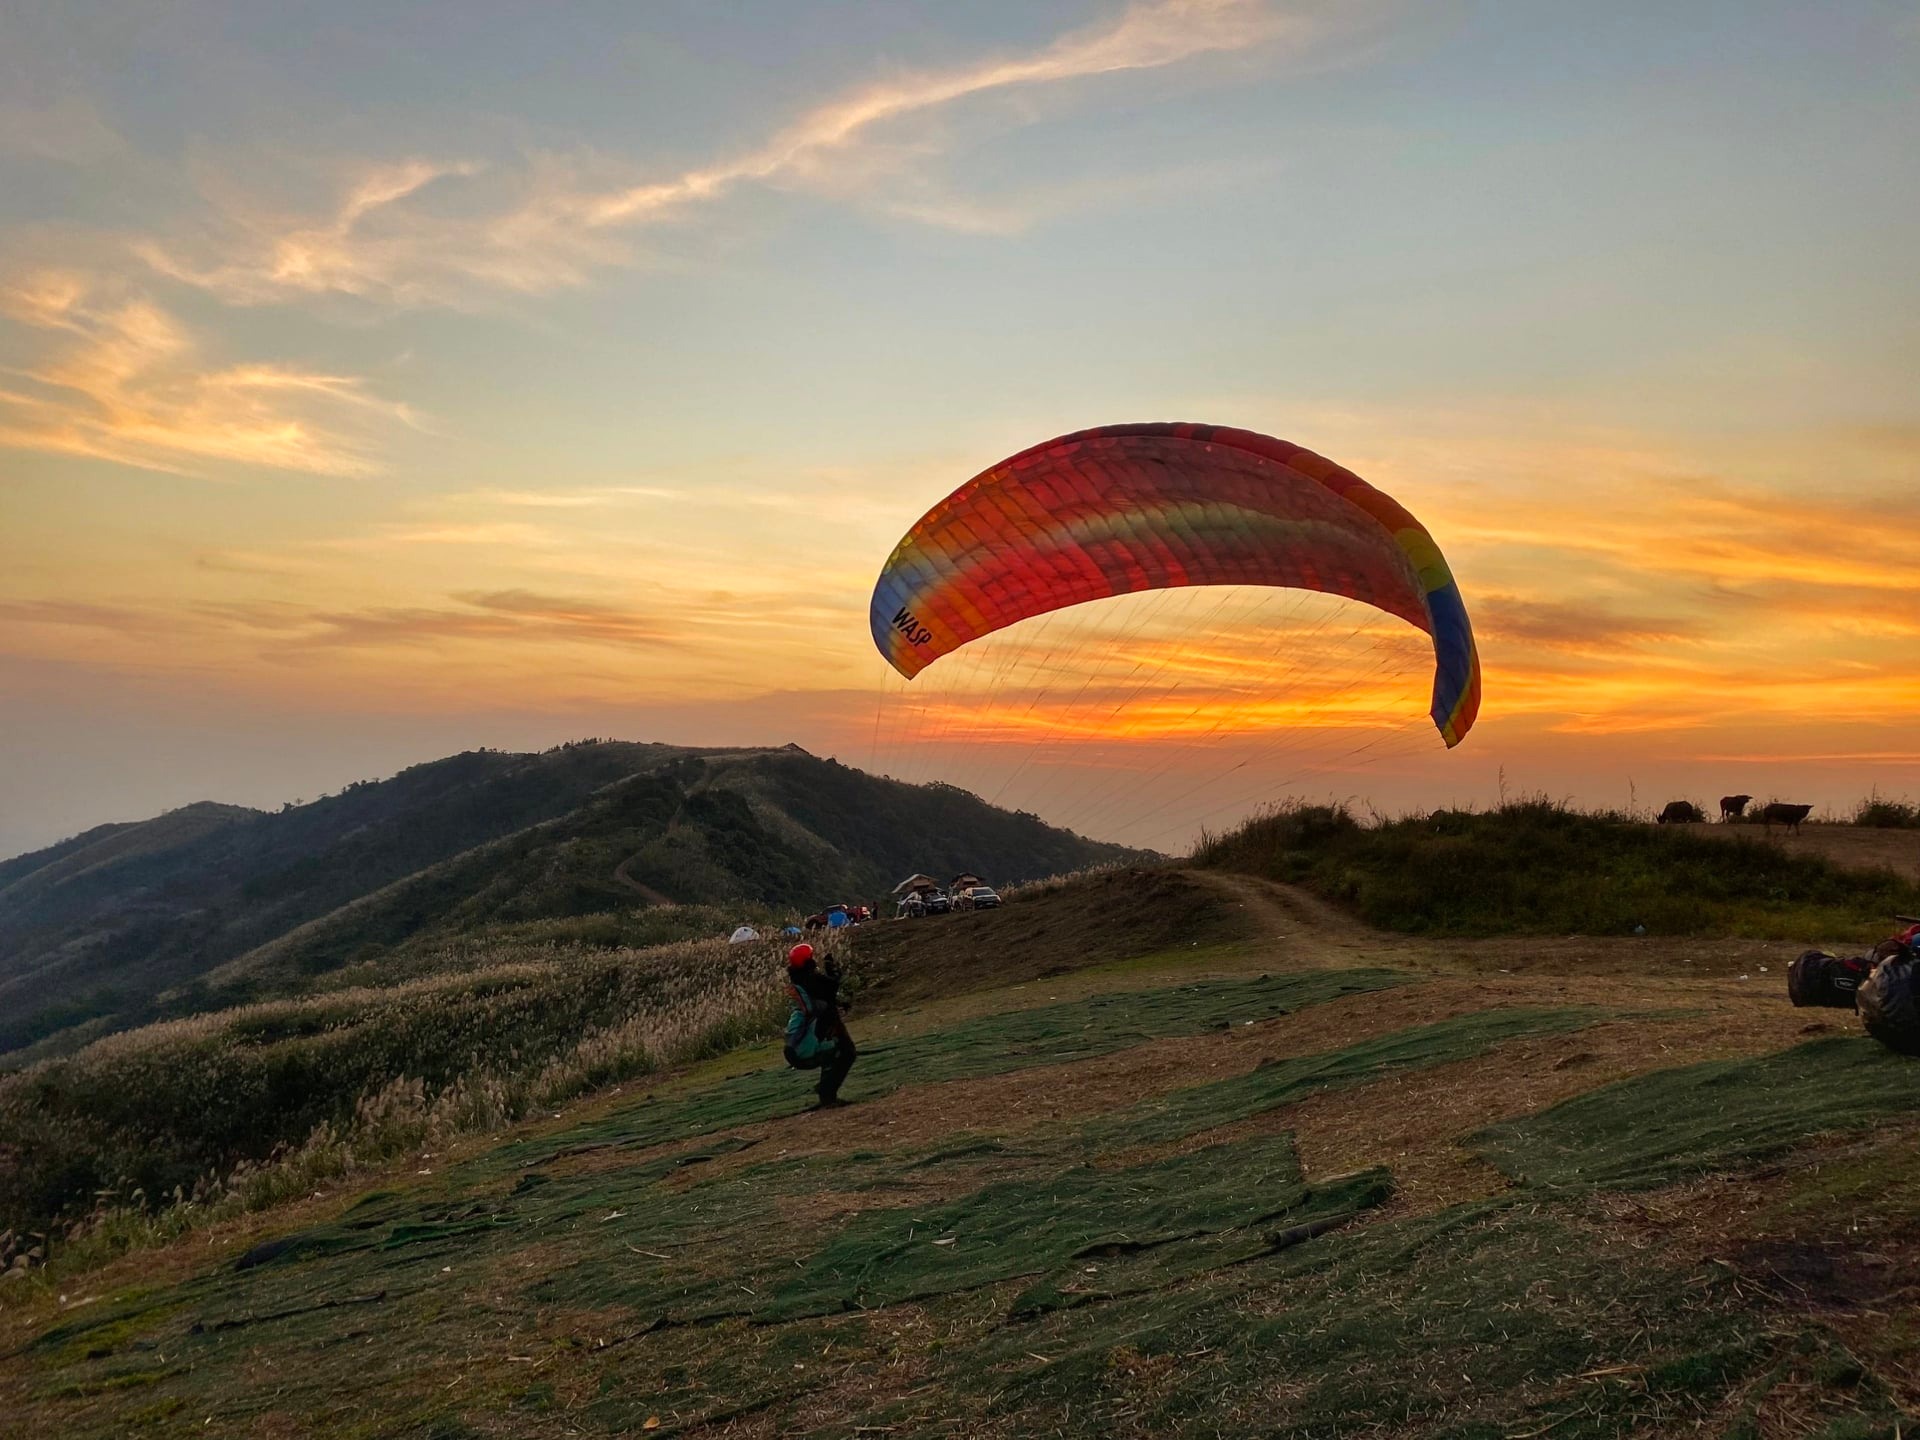 A paraglider flies under the sunset at Bu Hill on the outskirts of Hanoi, Vietnam. Photo by courtesy of Mebayluon